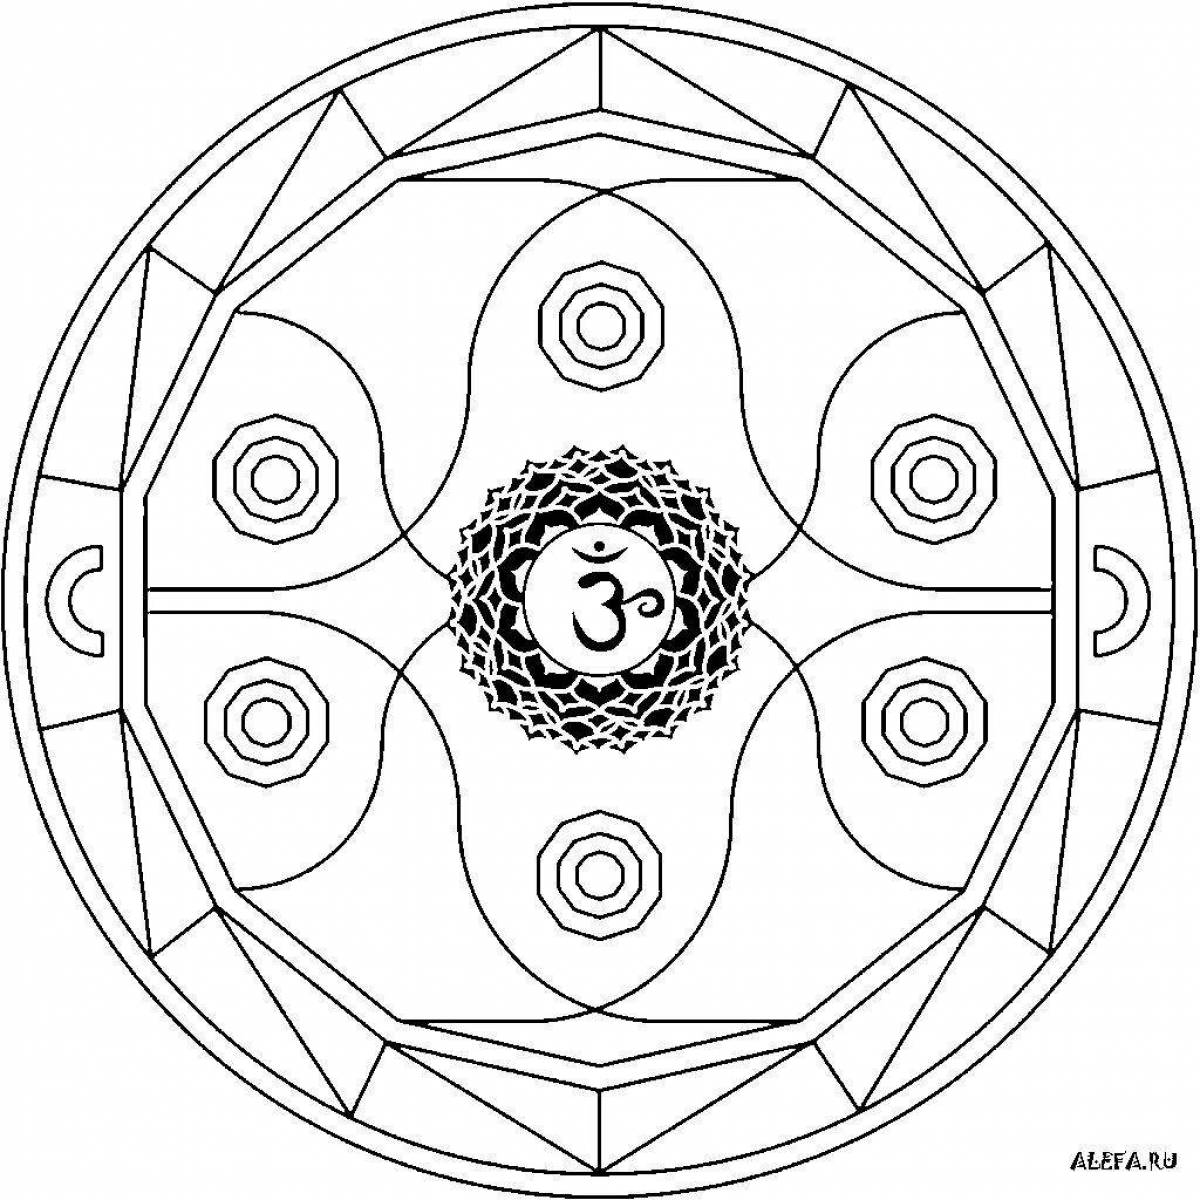 Gentle chakras coloring page